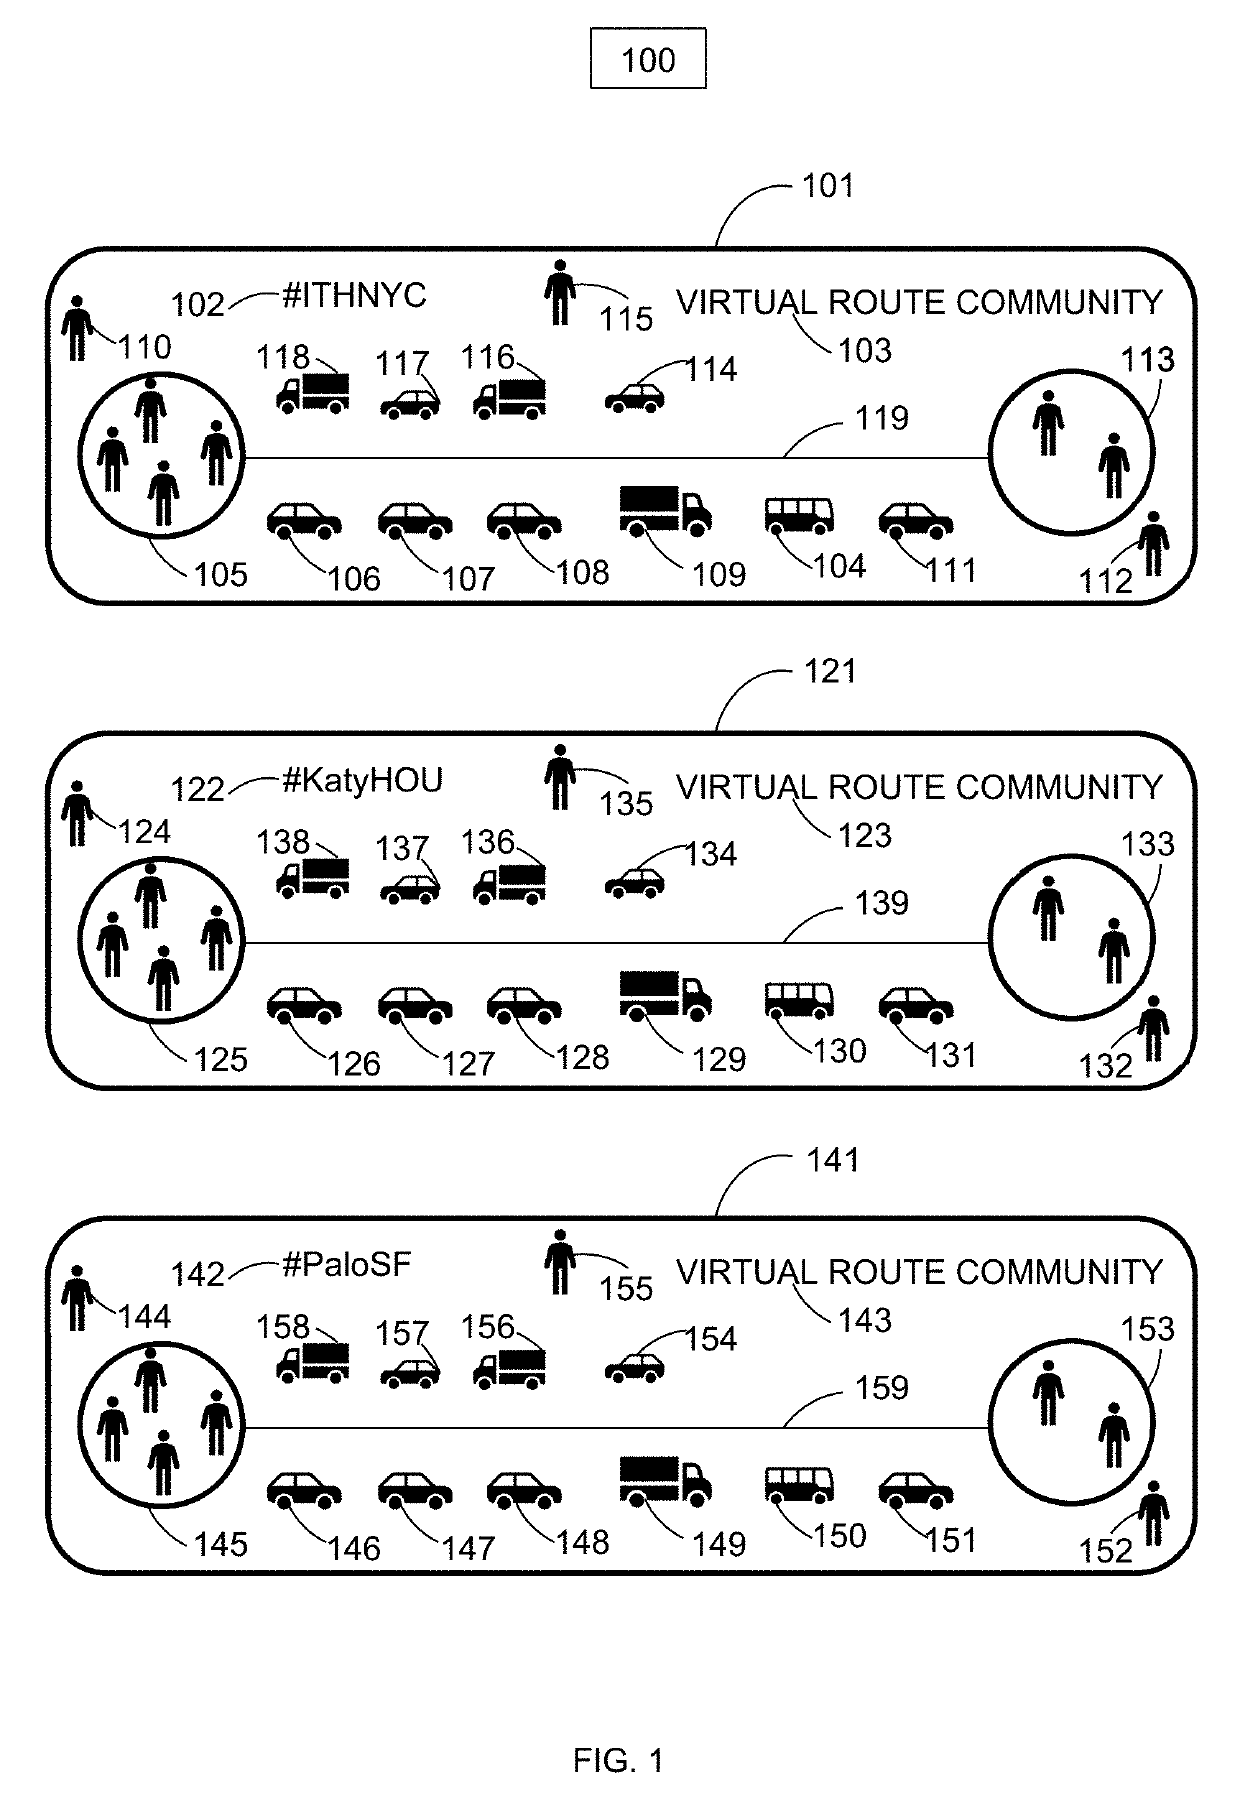 Navigation routes as community object virtual hub sequences to which users may subscribe